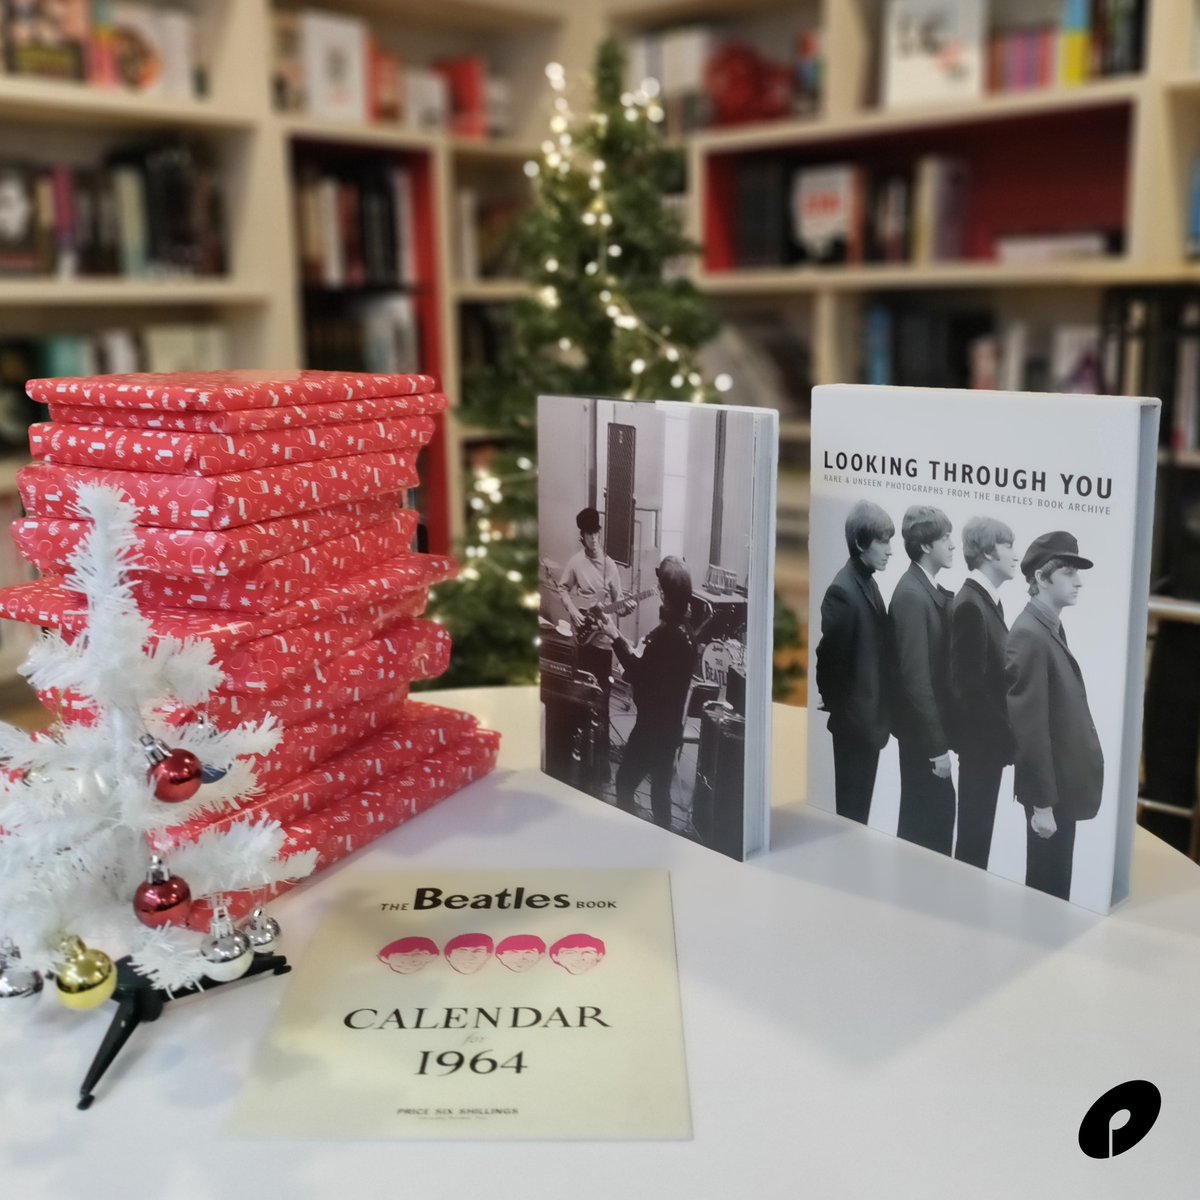 Okay.. What is the best Beatles song? Our final #12booksofchristmas is a limited edition 'With The Beatles: The Historic Photographs of Dezo Hoffmann' with a facsimile Fan Club calendar for 1964 Comment your pick. The random winner will be picked tomorrow! #beatles #thebeatles